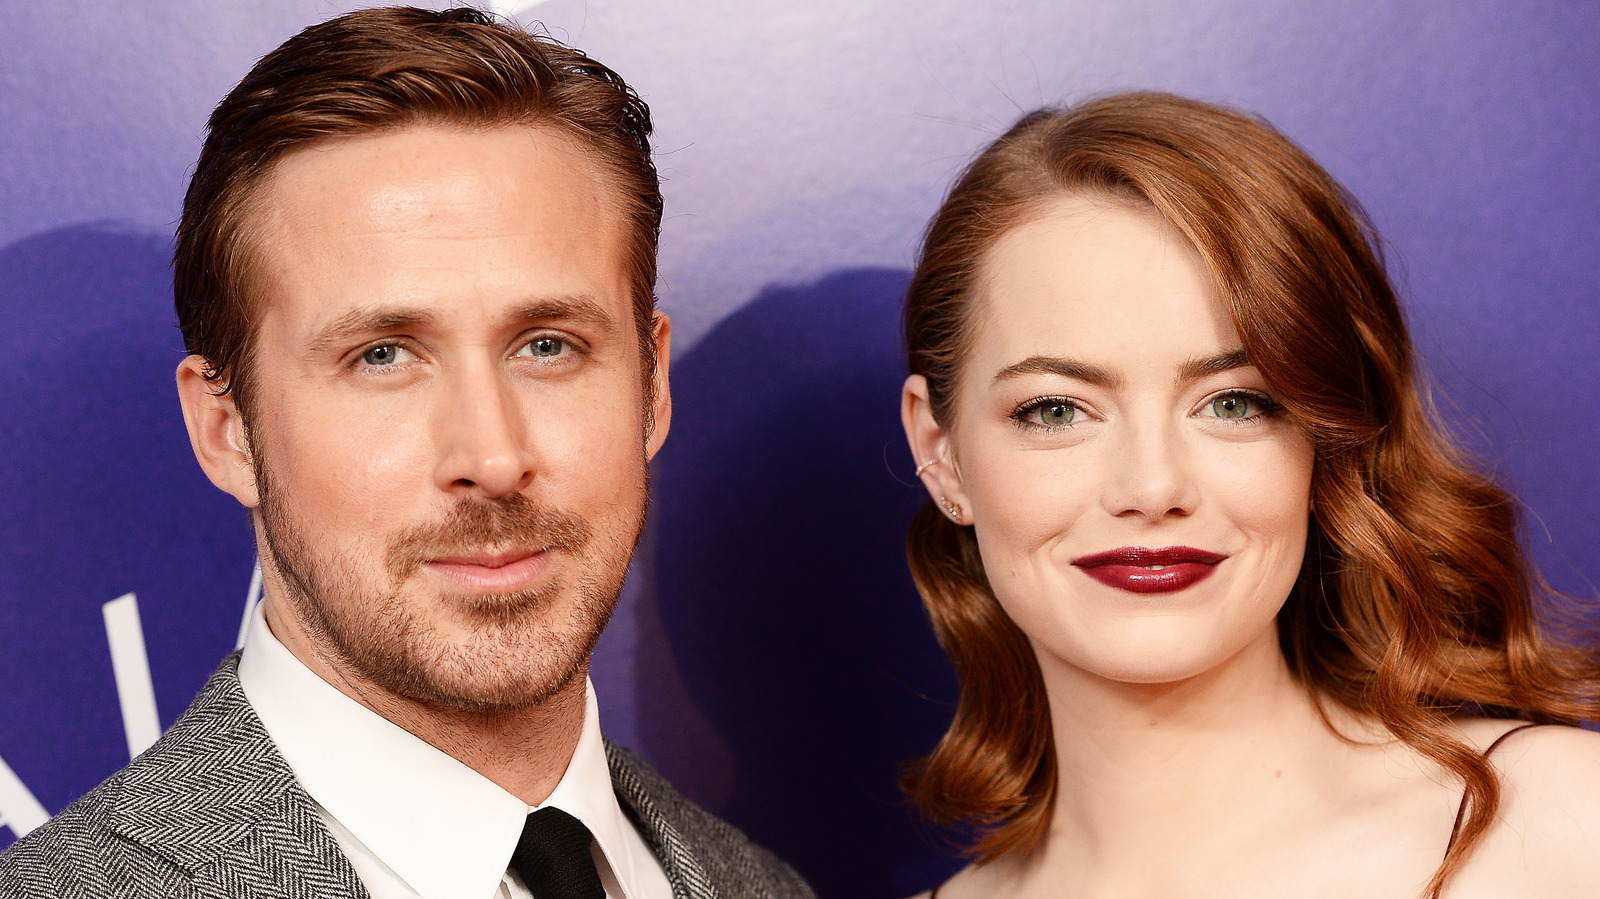 What Ryan Gosling And Emma Stone's Relationship Is Like In Real Life